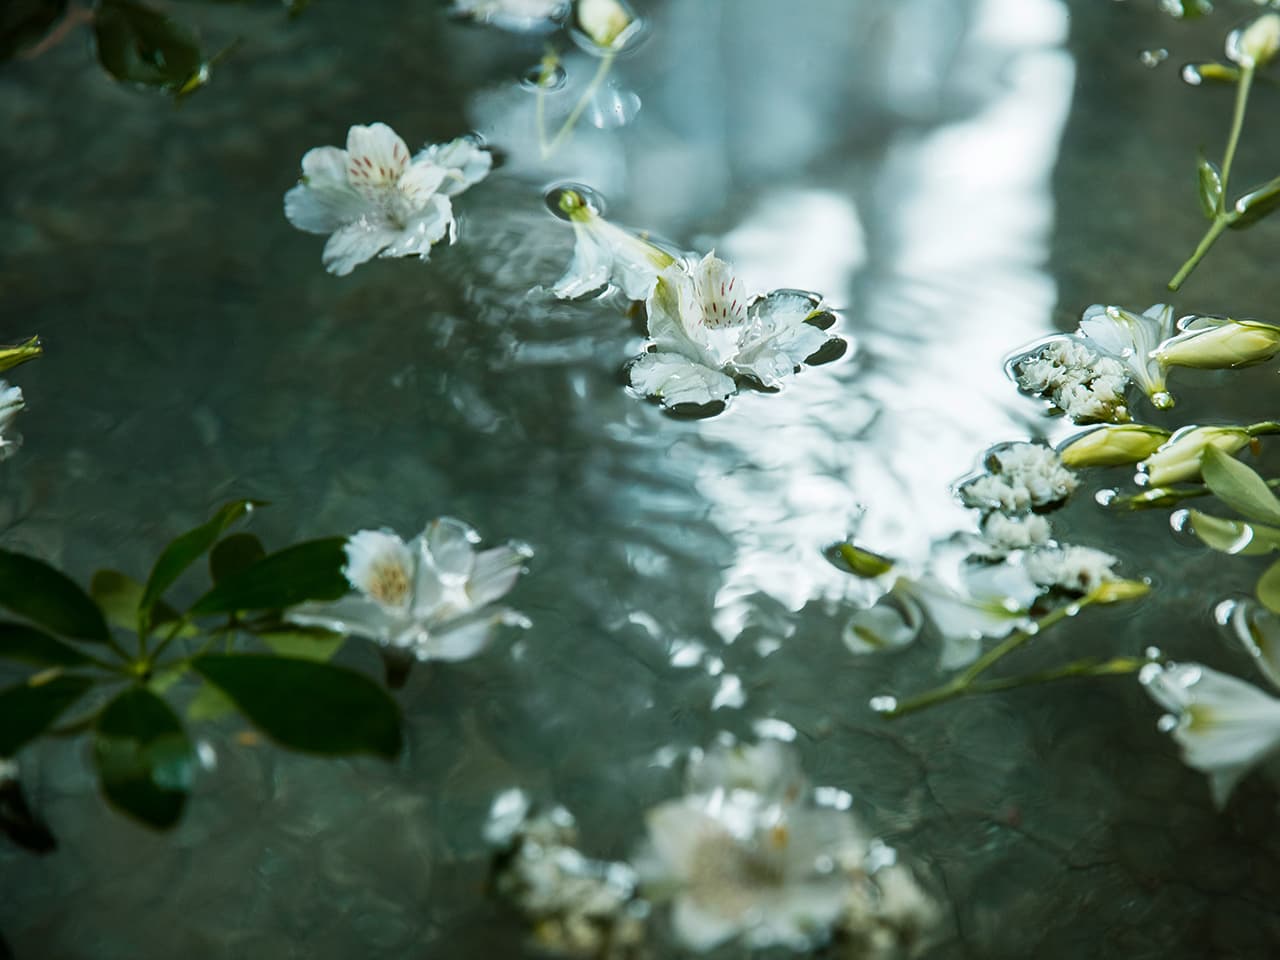 Flowers floating on water